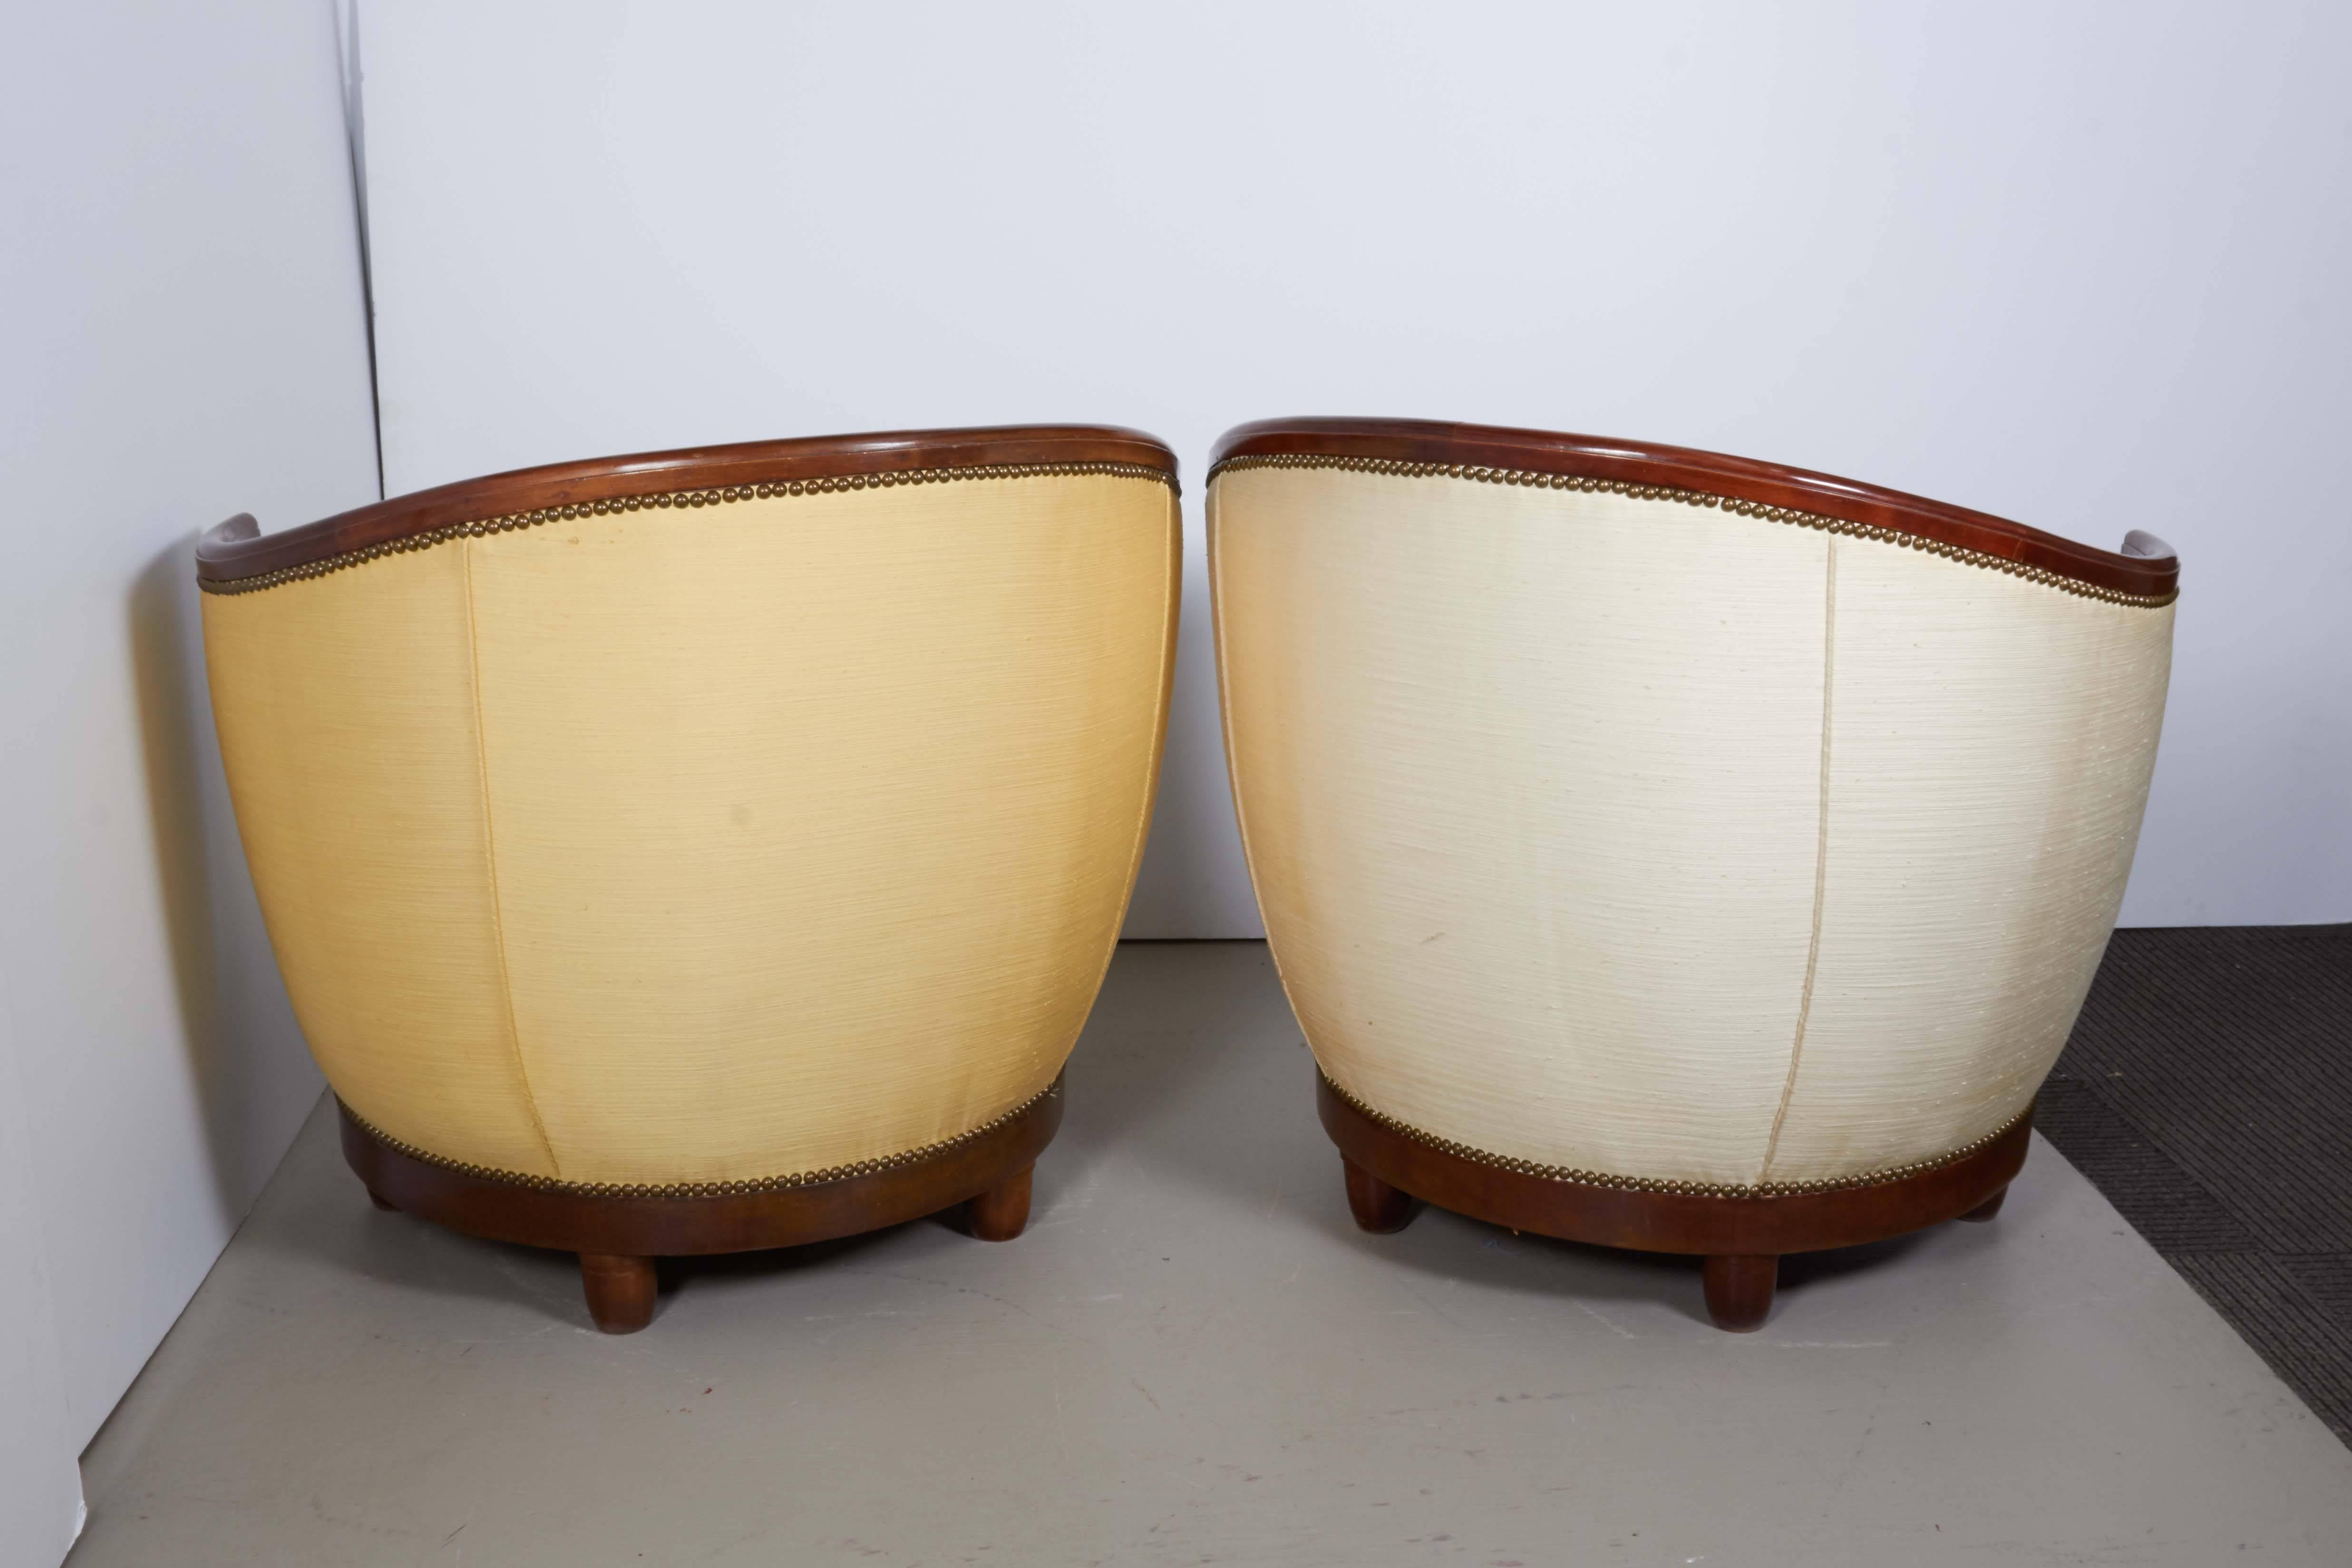 Brass Pair of French Art Deco Mahogany Tub Chairs